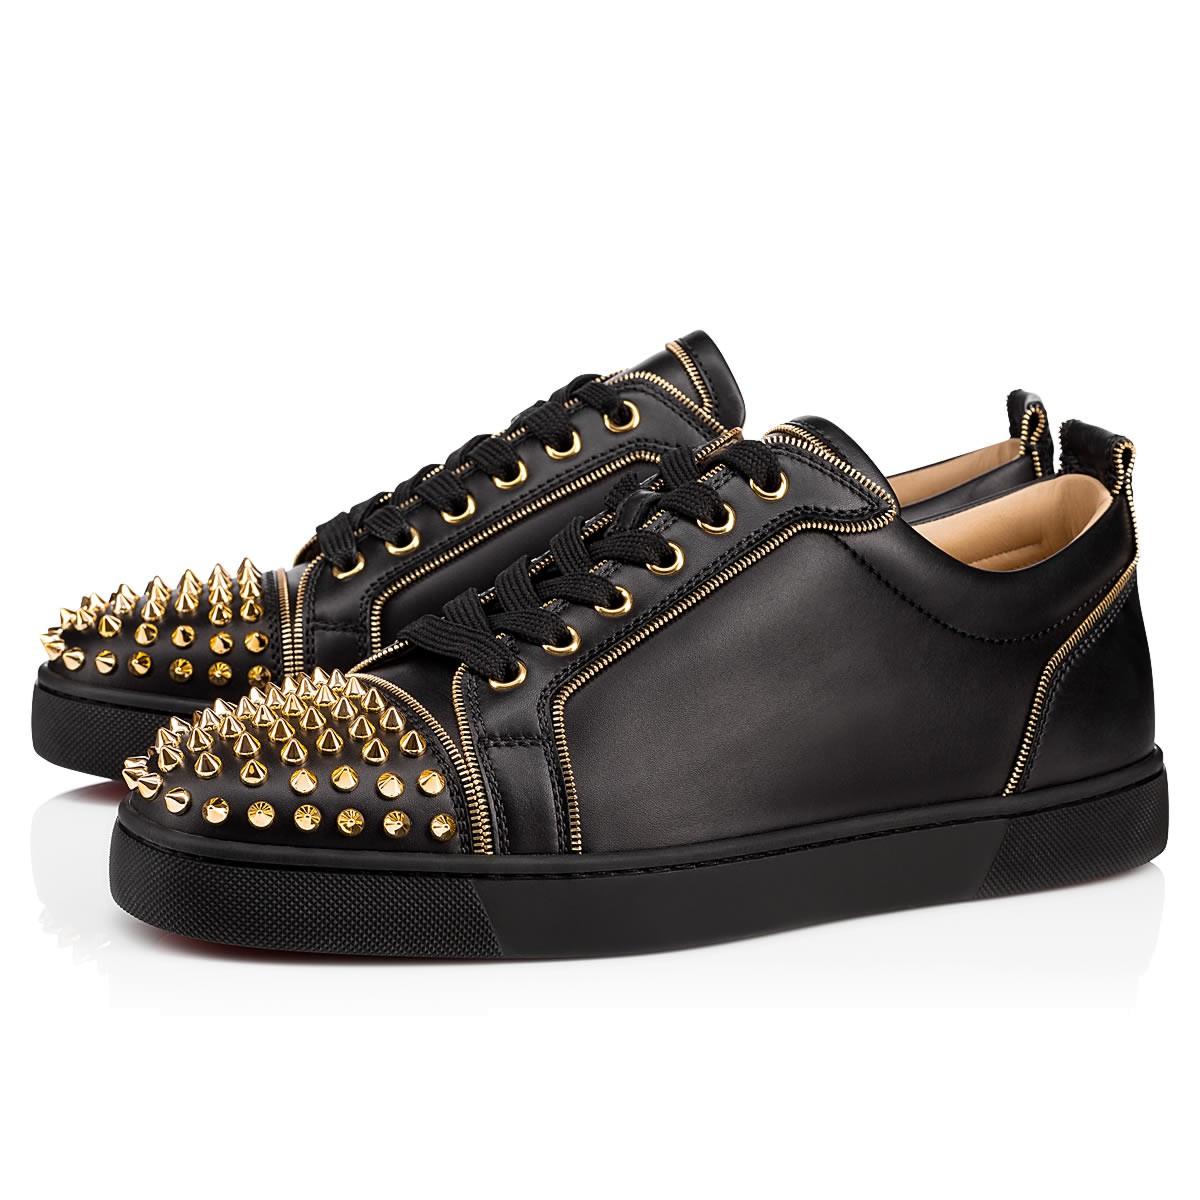 black and gold spiked shoes